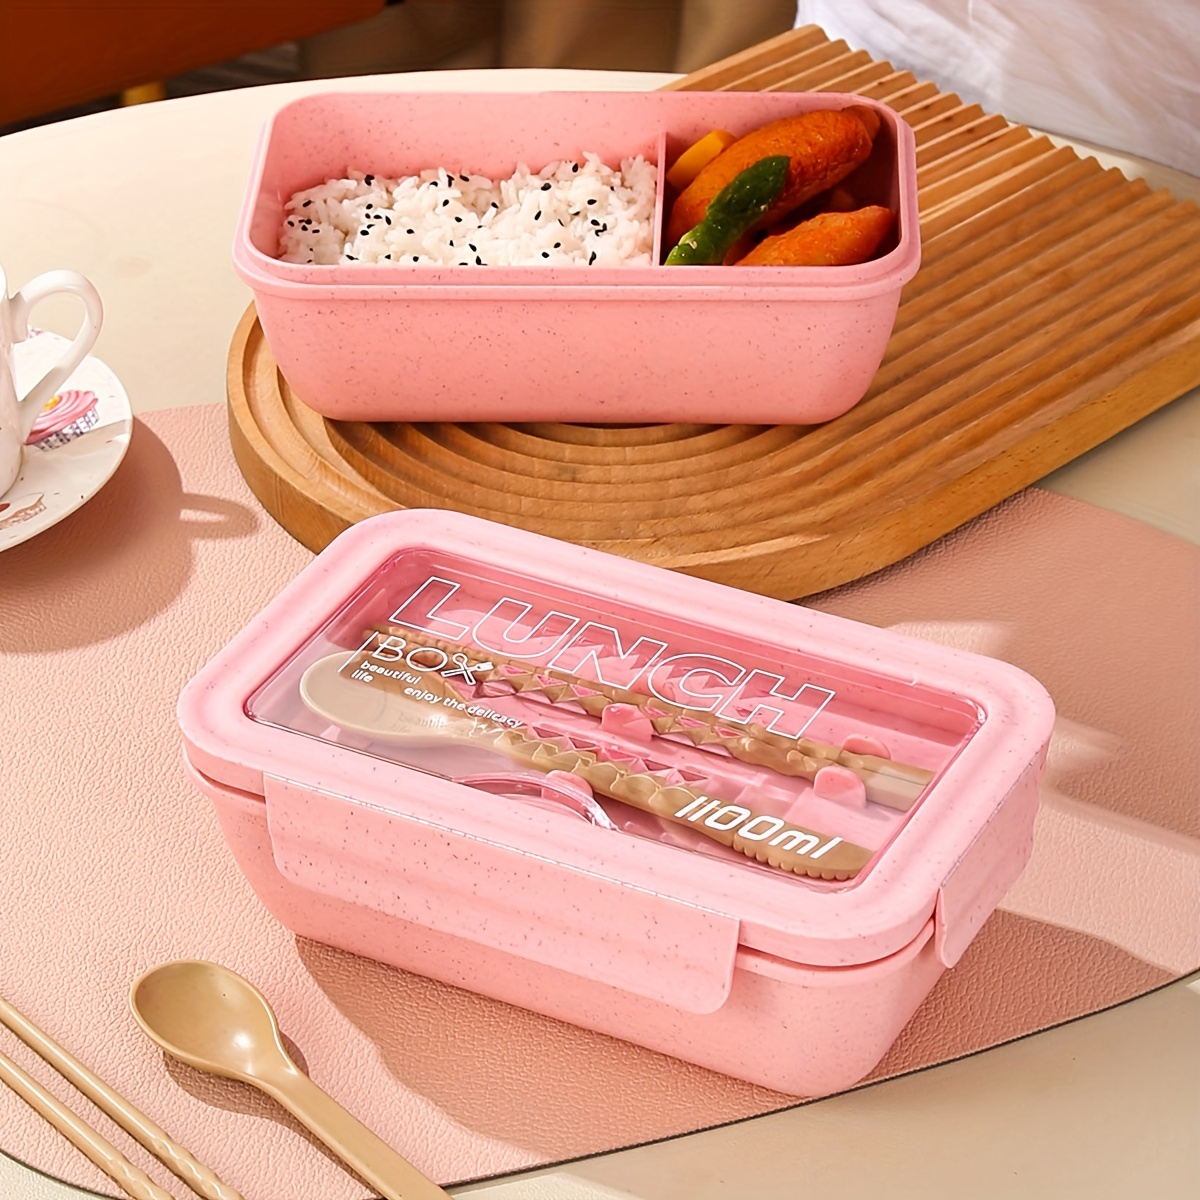 1pc, Bento Box, Wheat Straw Adult Lunch Box, 4-Compartment Meal